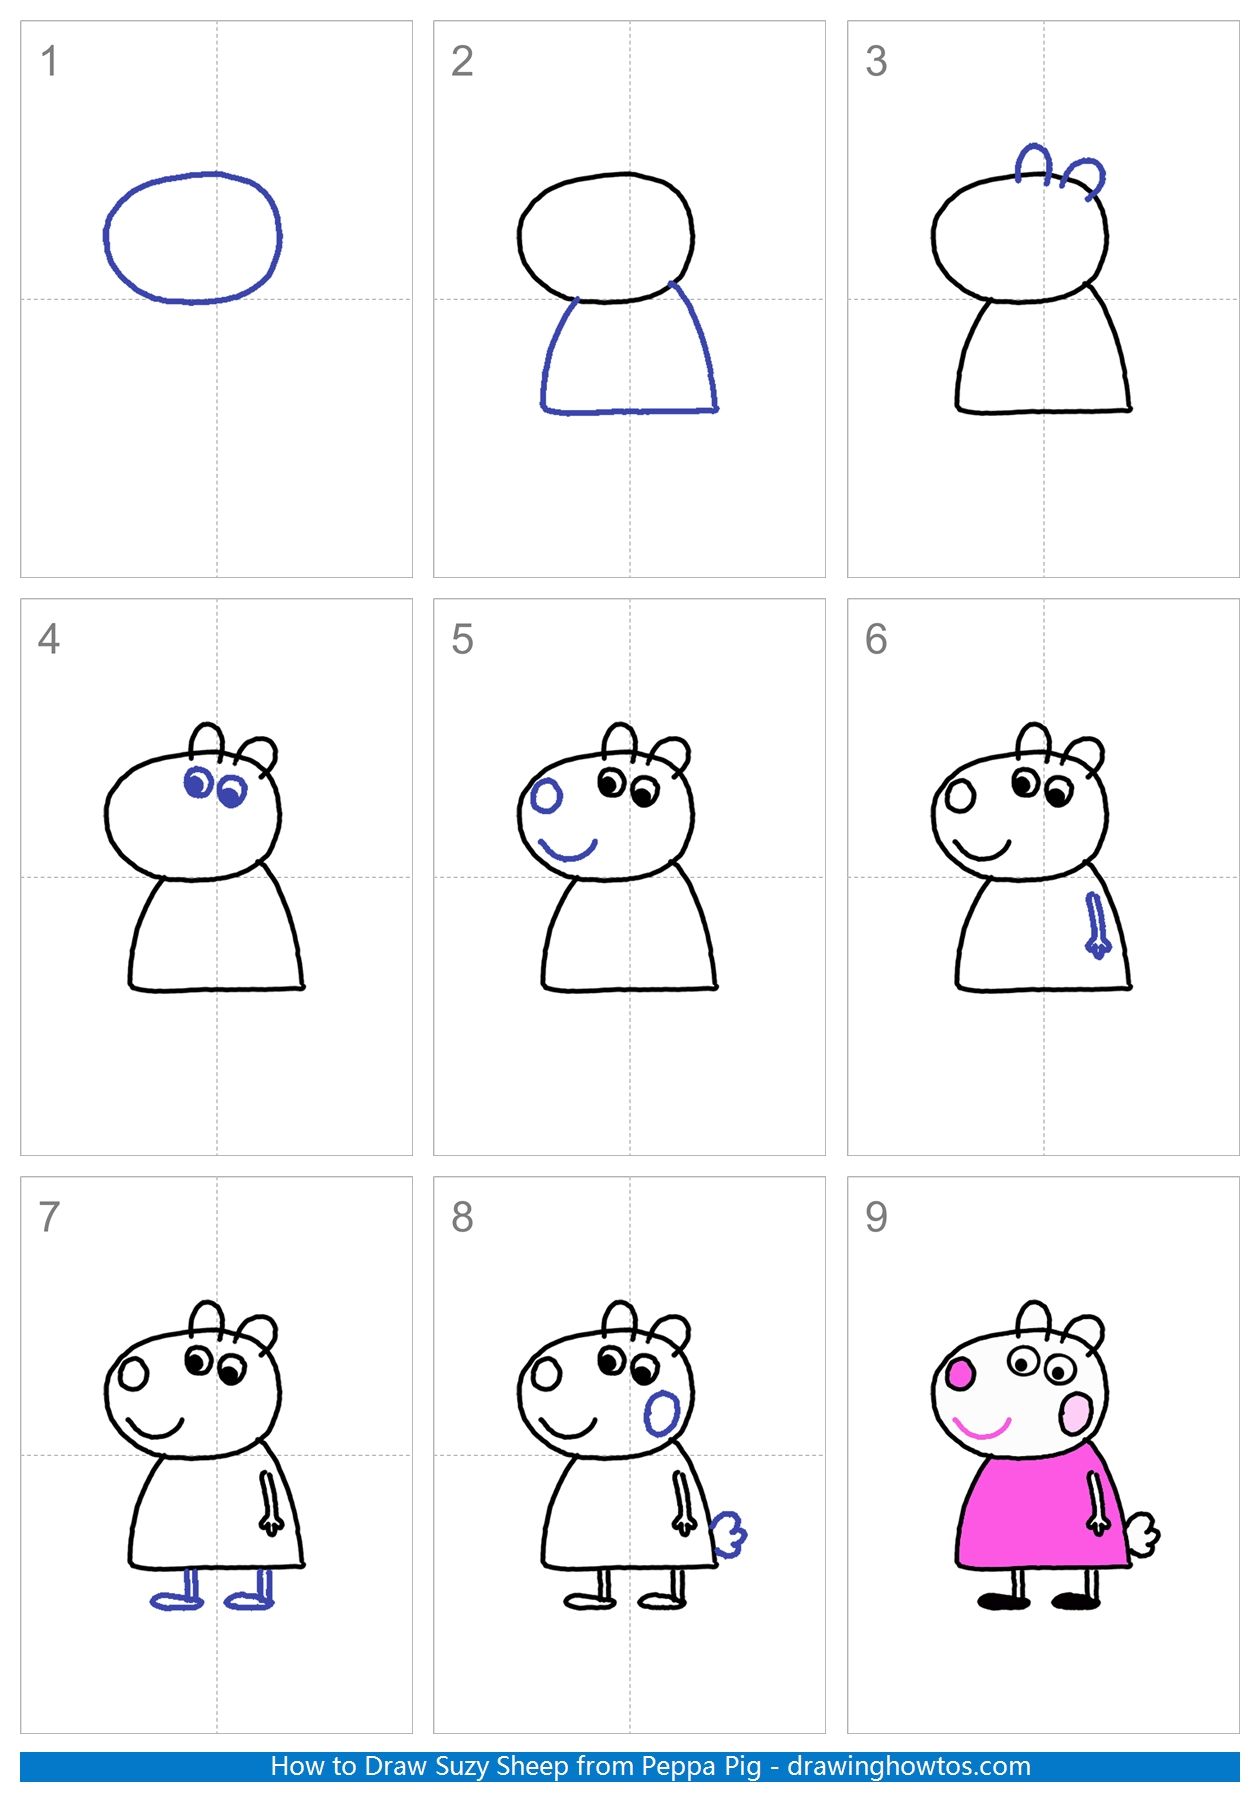 How to Draw Suzy Sheep from Peppa Pig Step by Step